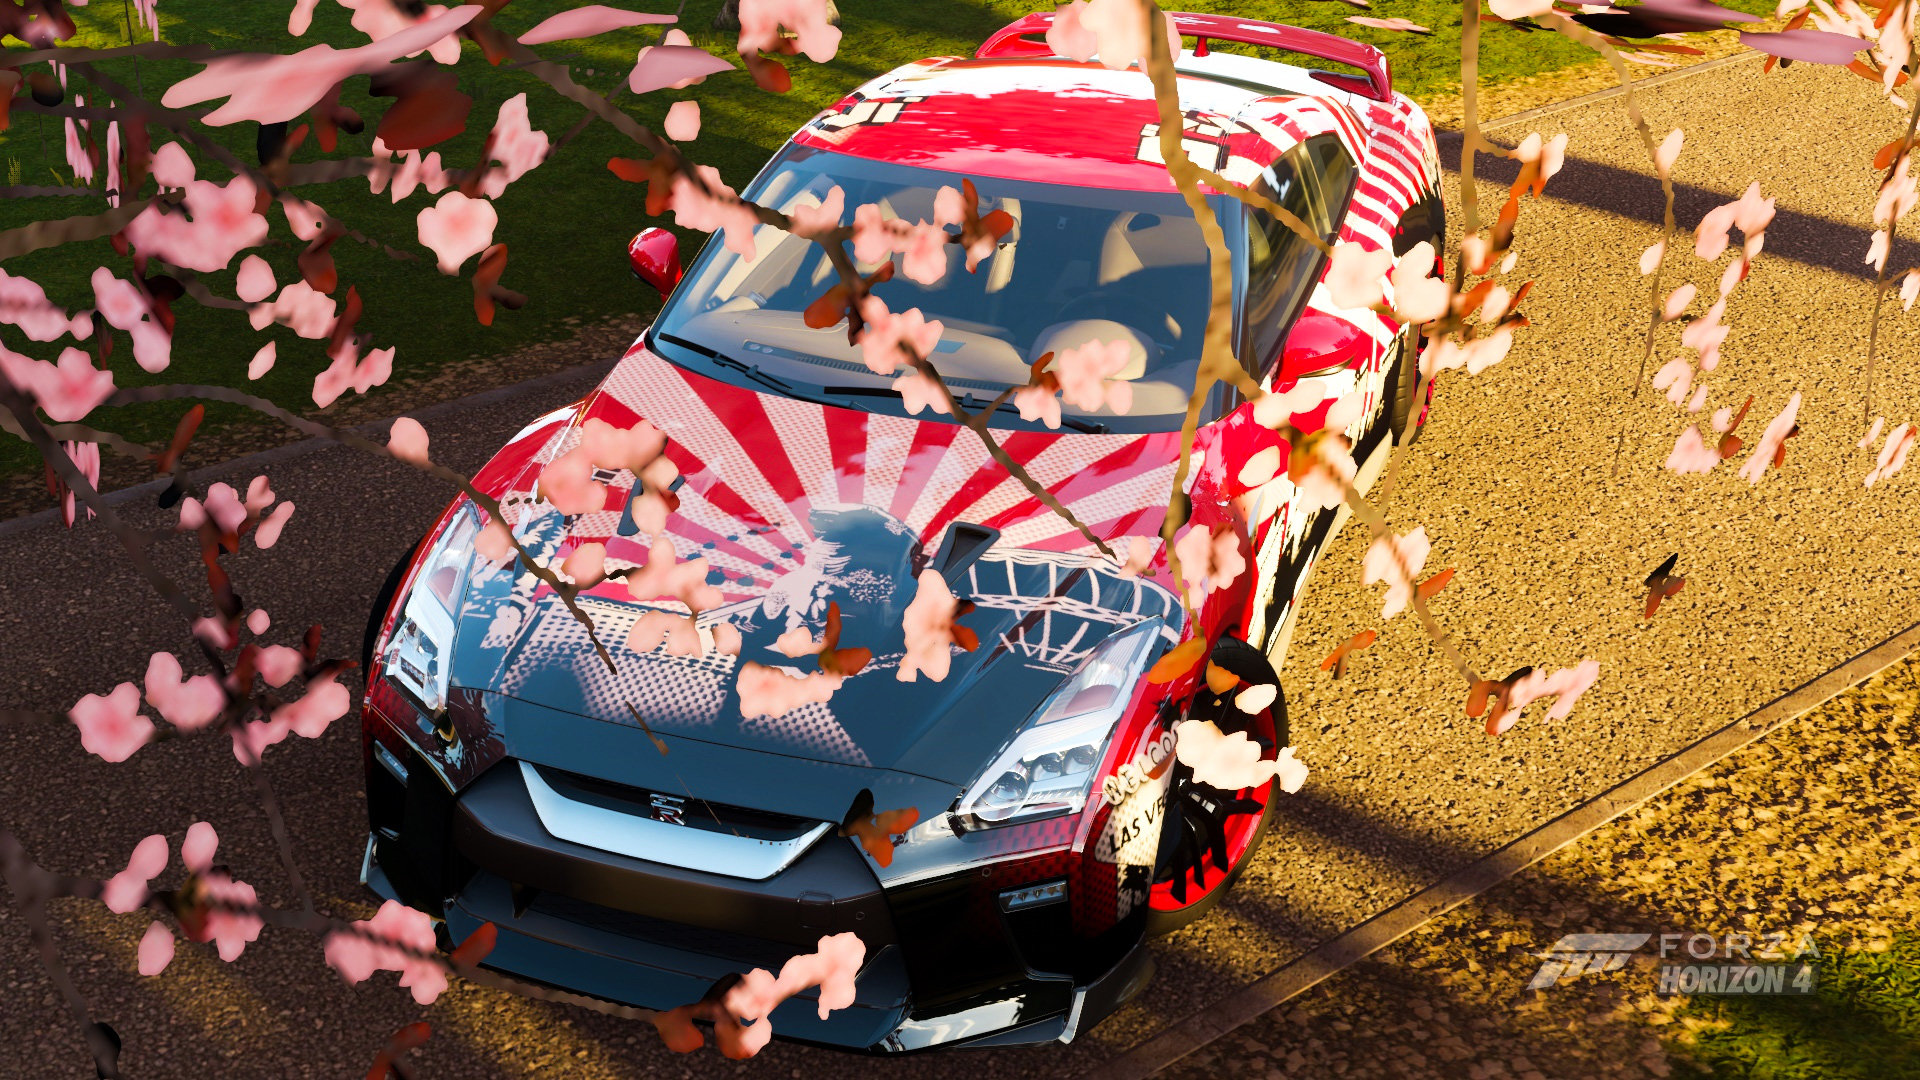 Forza Horizon 4 Livery Contest Liverycomp46 Always Note New Rules And Prizes Community Events Forza Motorsport Forums